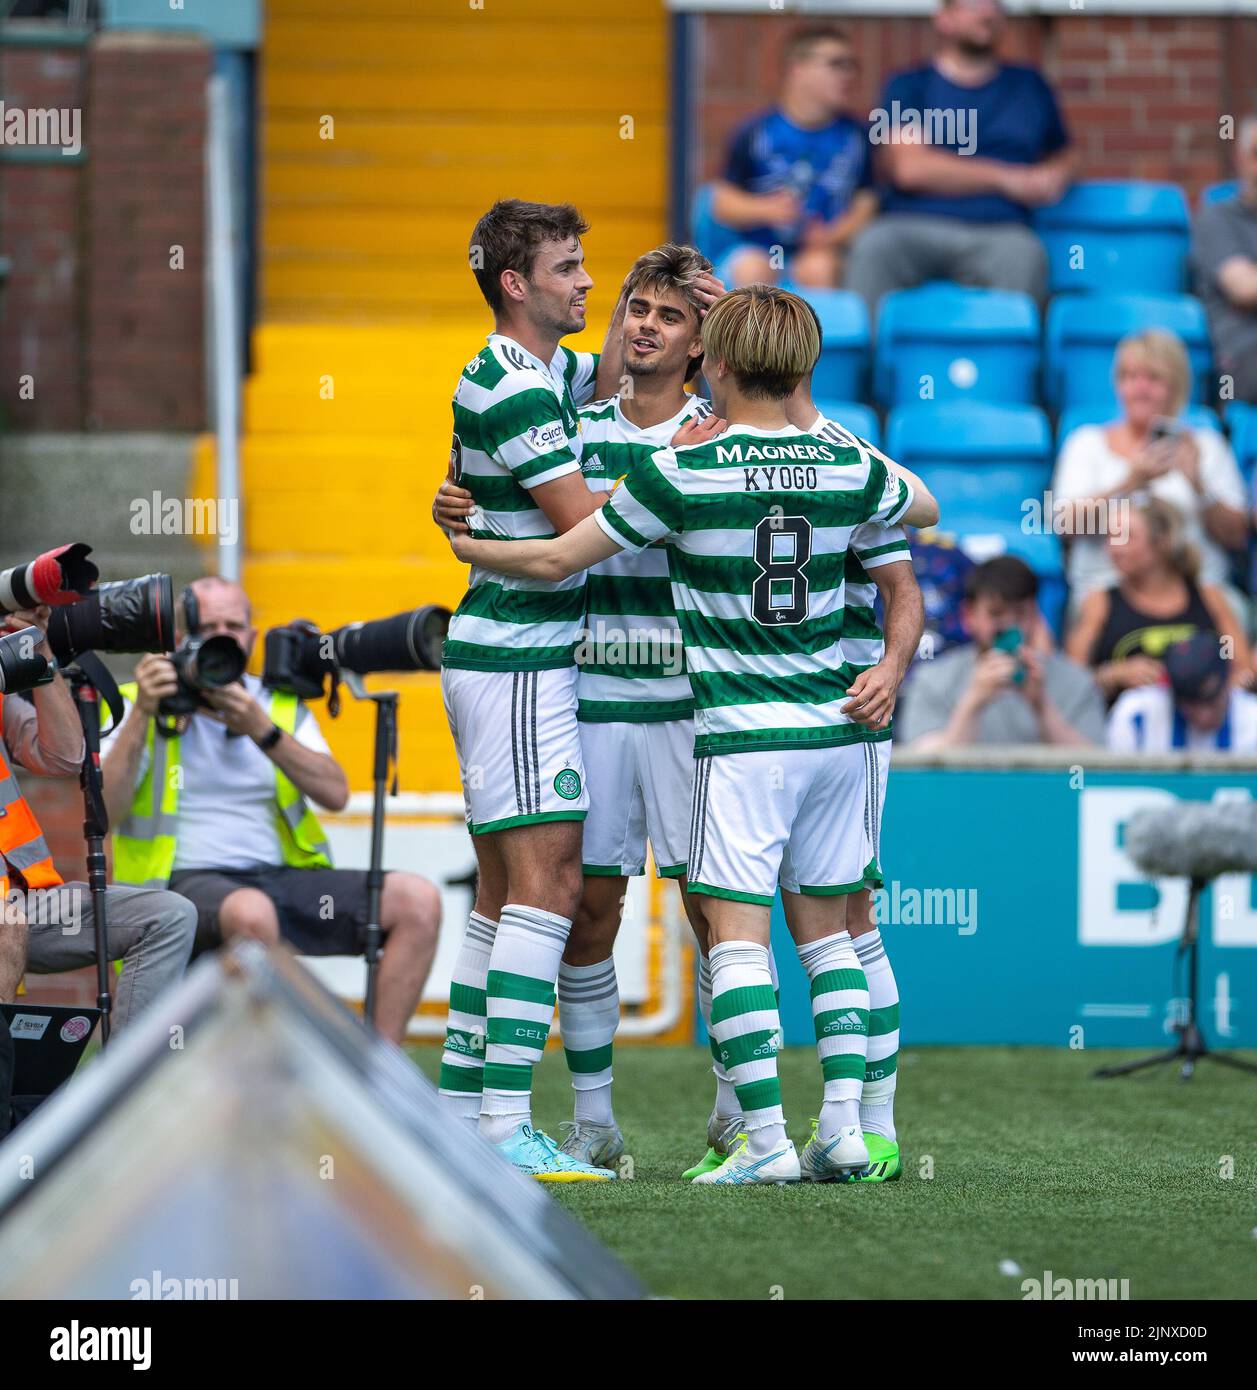 Kilmarnock, Scotland, UK. Kilmarnock, Scotland, UK. 14th August 2022; The BBSP Stadium Rugby Park, Kilmarnock, Scotland: Scottish premier league football, Kilmarnock FC versus Celtic: Joao Pedro Neves Filipe Jota of Celtic celebrates after he puts Celtic into a 2-0 lead in the 35th minute Credit: Action Plus Sports Images/Alamy Live News Credit: Action Plus Sports Images/Alamy Live News Stock Photo